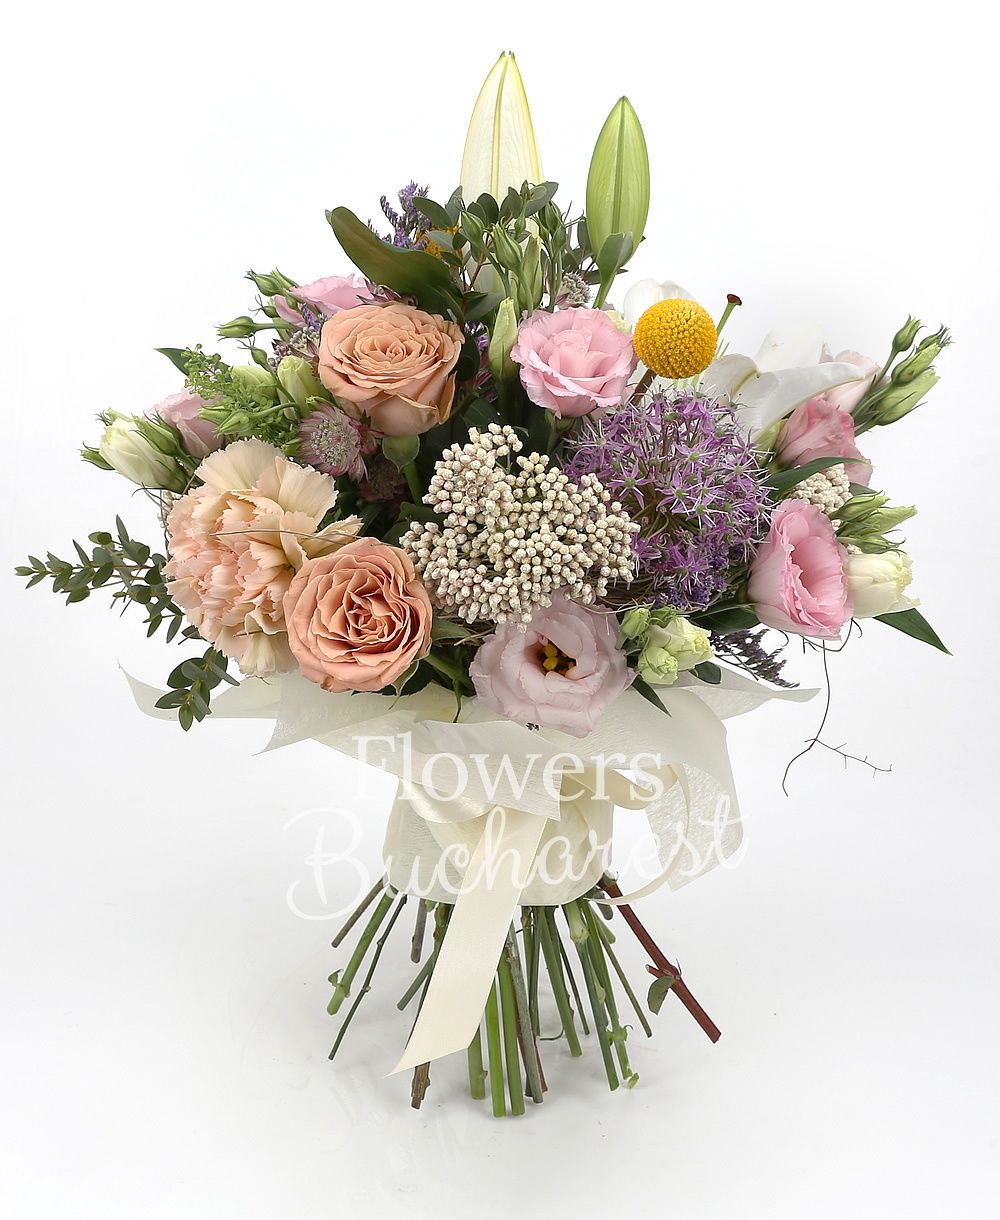 1 white imperial lily, 5 cappuccino roses, 3 cream carnations, 3 pink lisianthus, 3 rice flower, red astranția, 3 allium, greenery